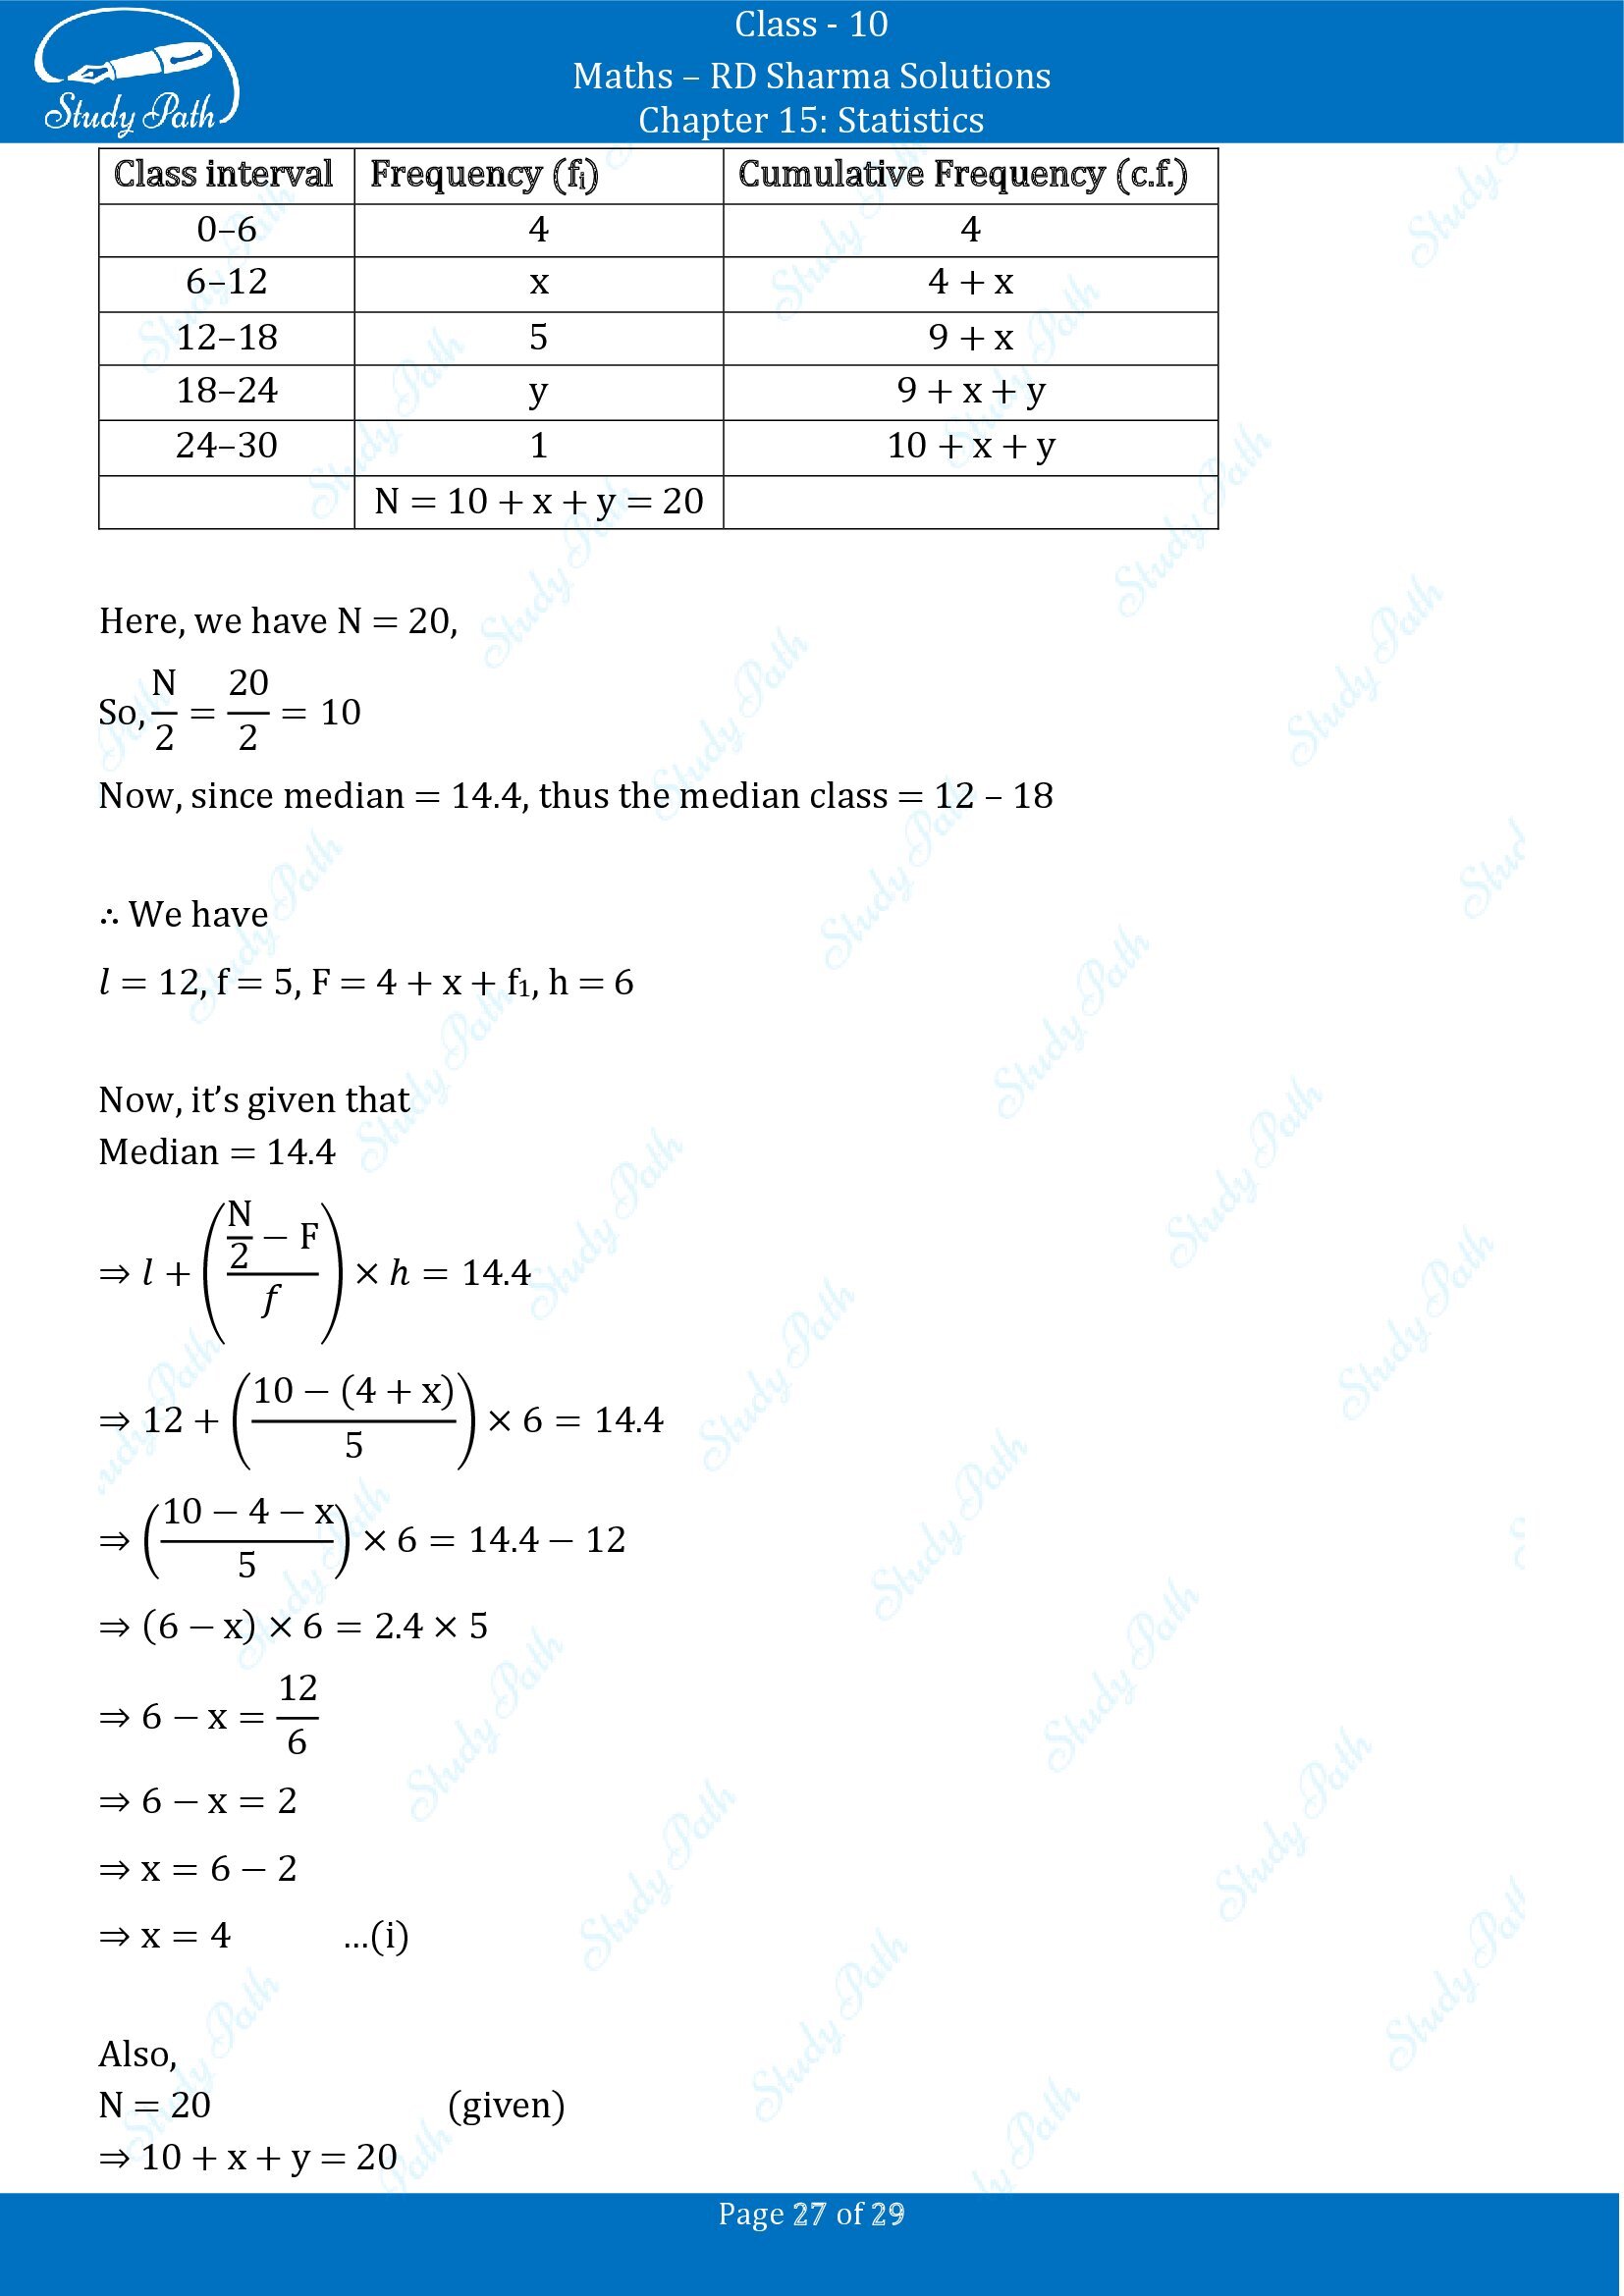 RD Sharma Solutions Class 10 Chapter 15 Statistics Exercise 15.4 00027